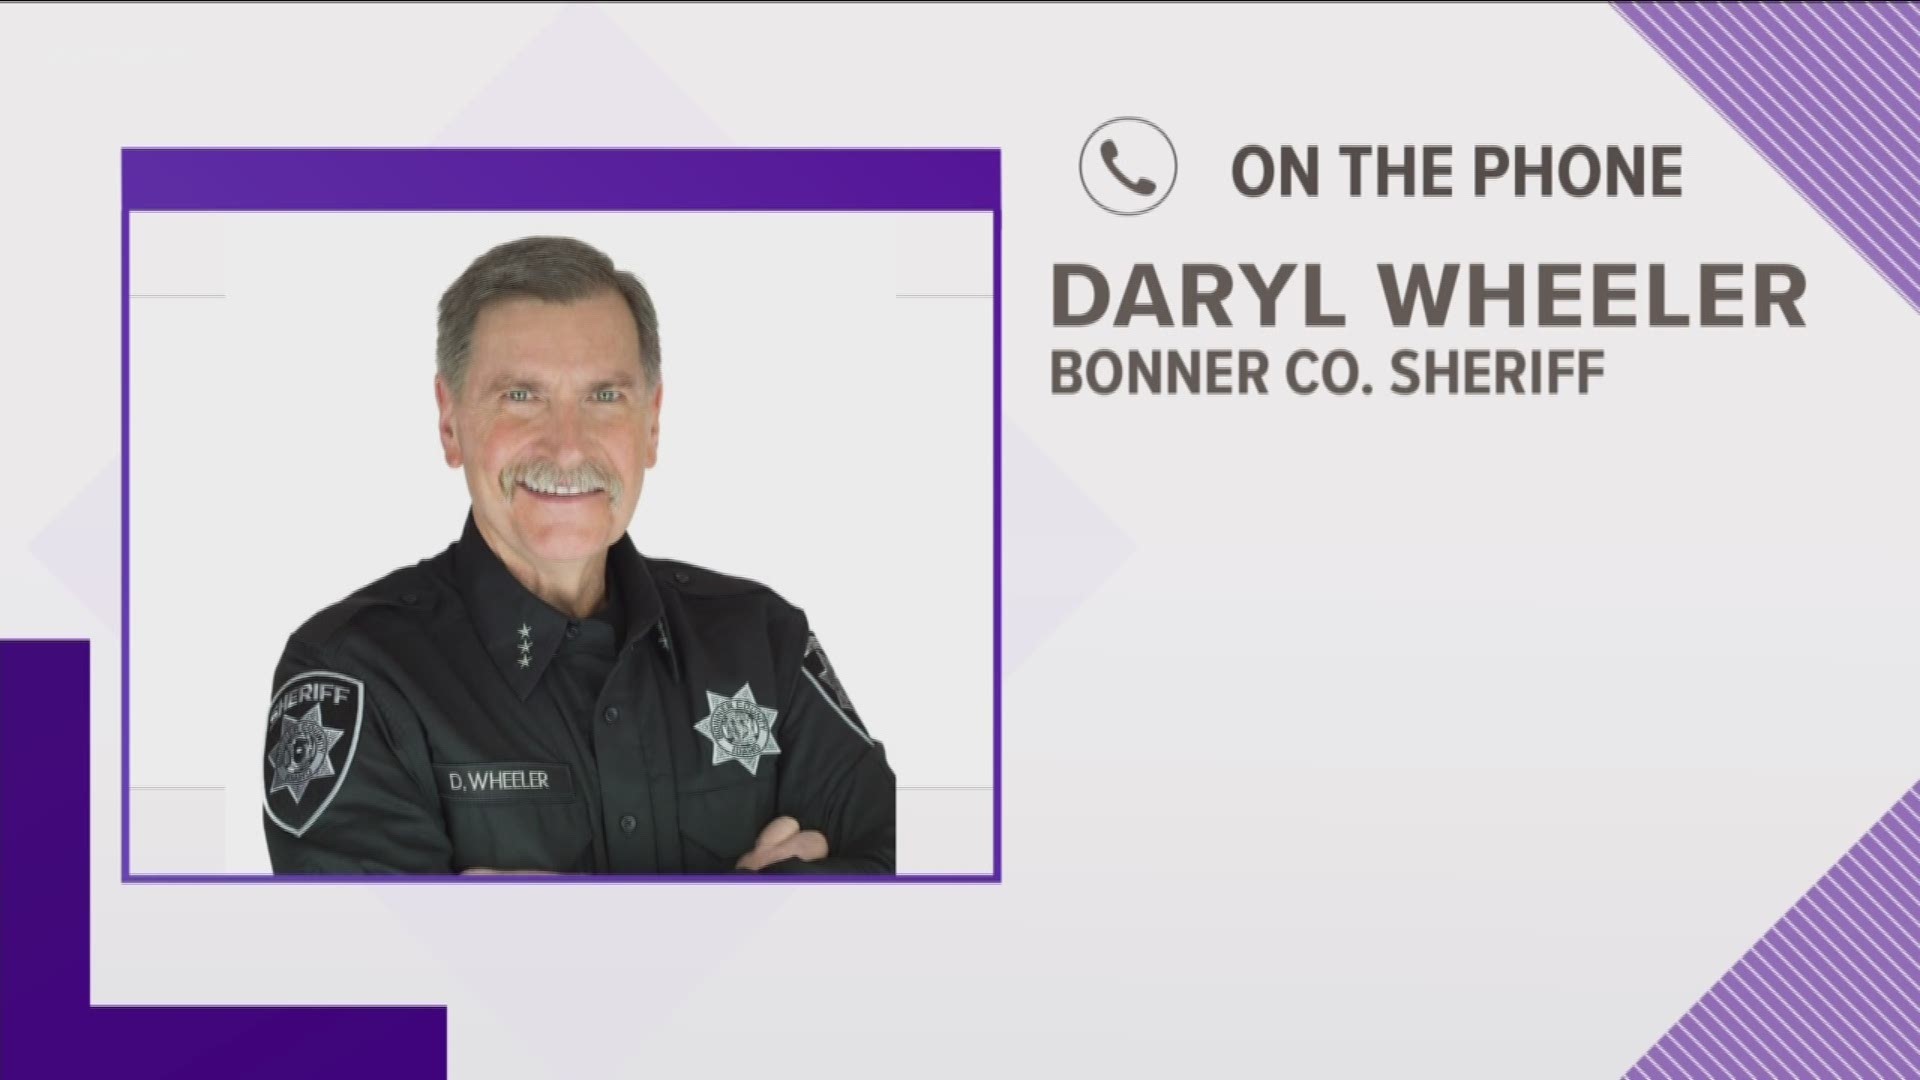 Sheriff Daryl Wheeler believes public health officials have misled us and “now it is time to reinstate our Constitution.”